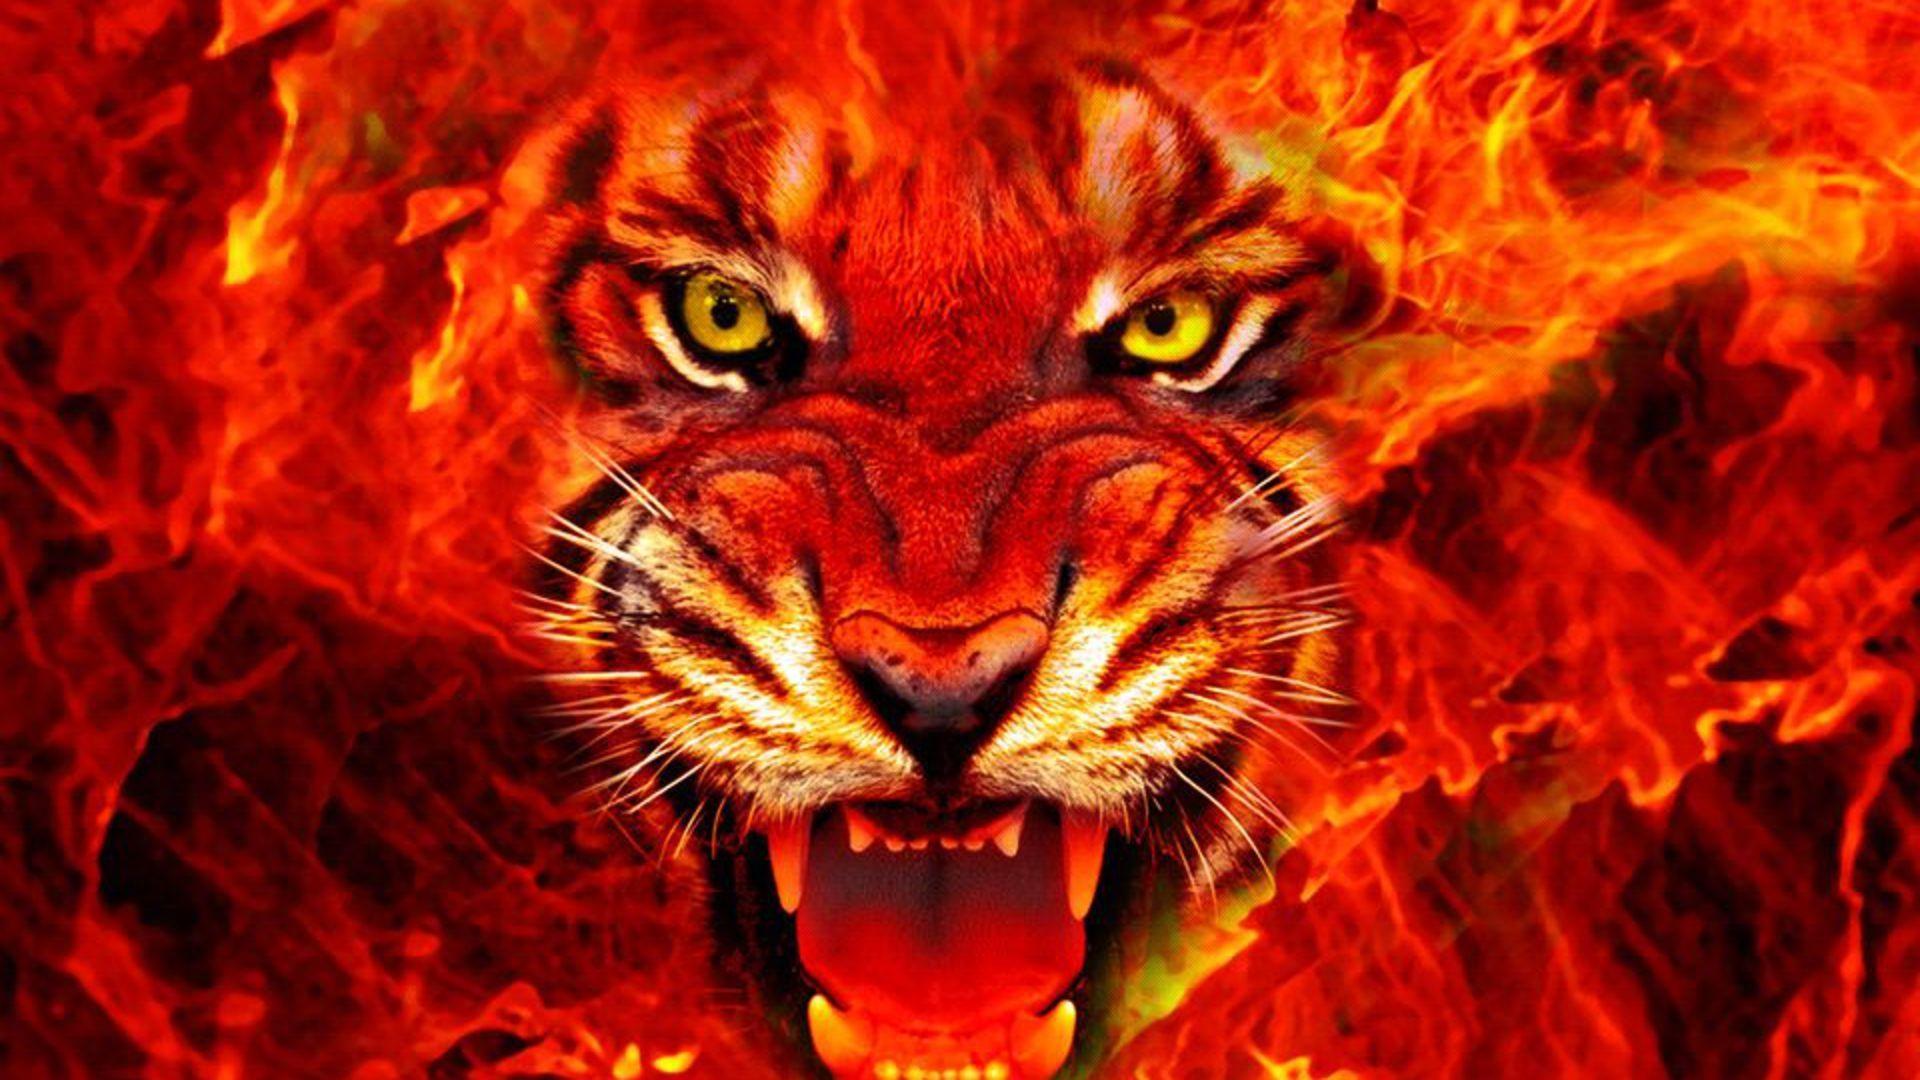 Wallpaper HD fire king image picture. Tiger